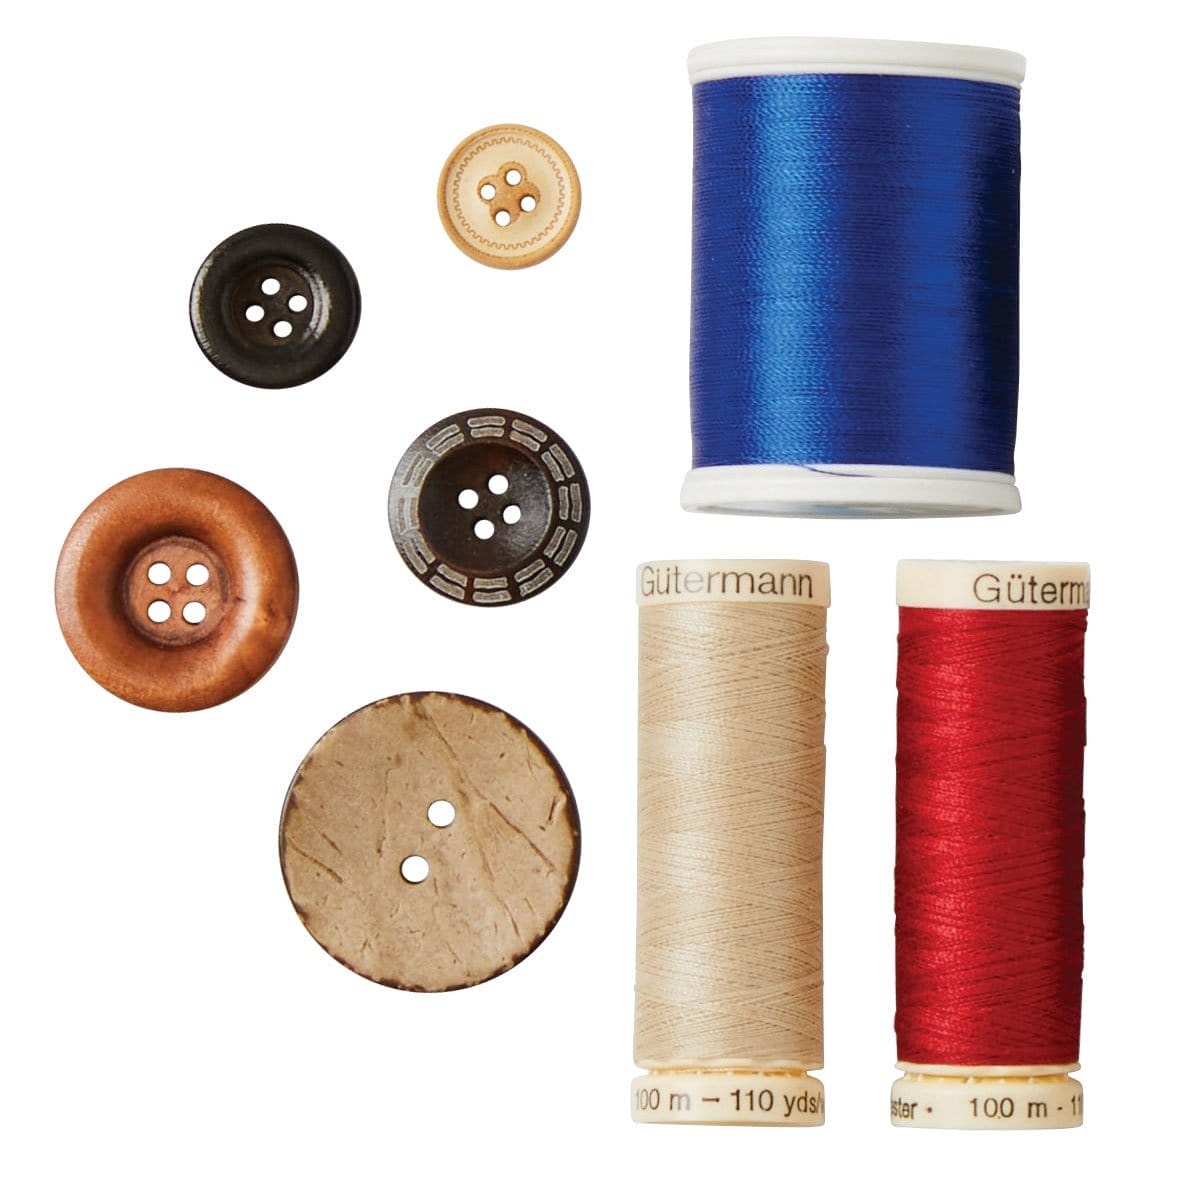 B3G2 Free* ENTIRE STOCK Buttons & Thread. 40% off online